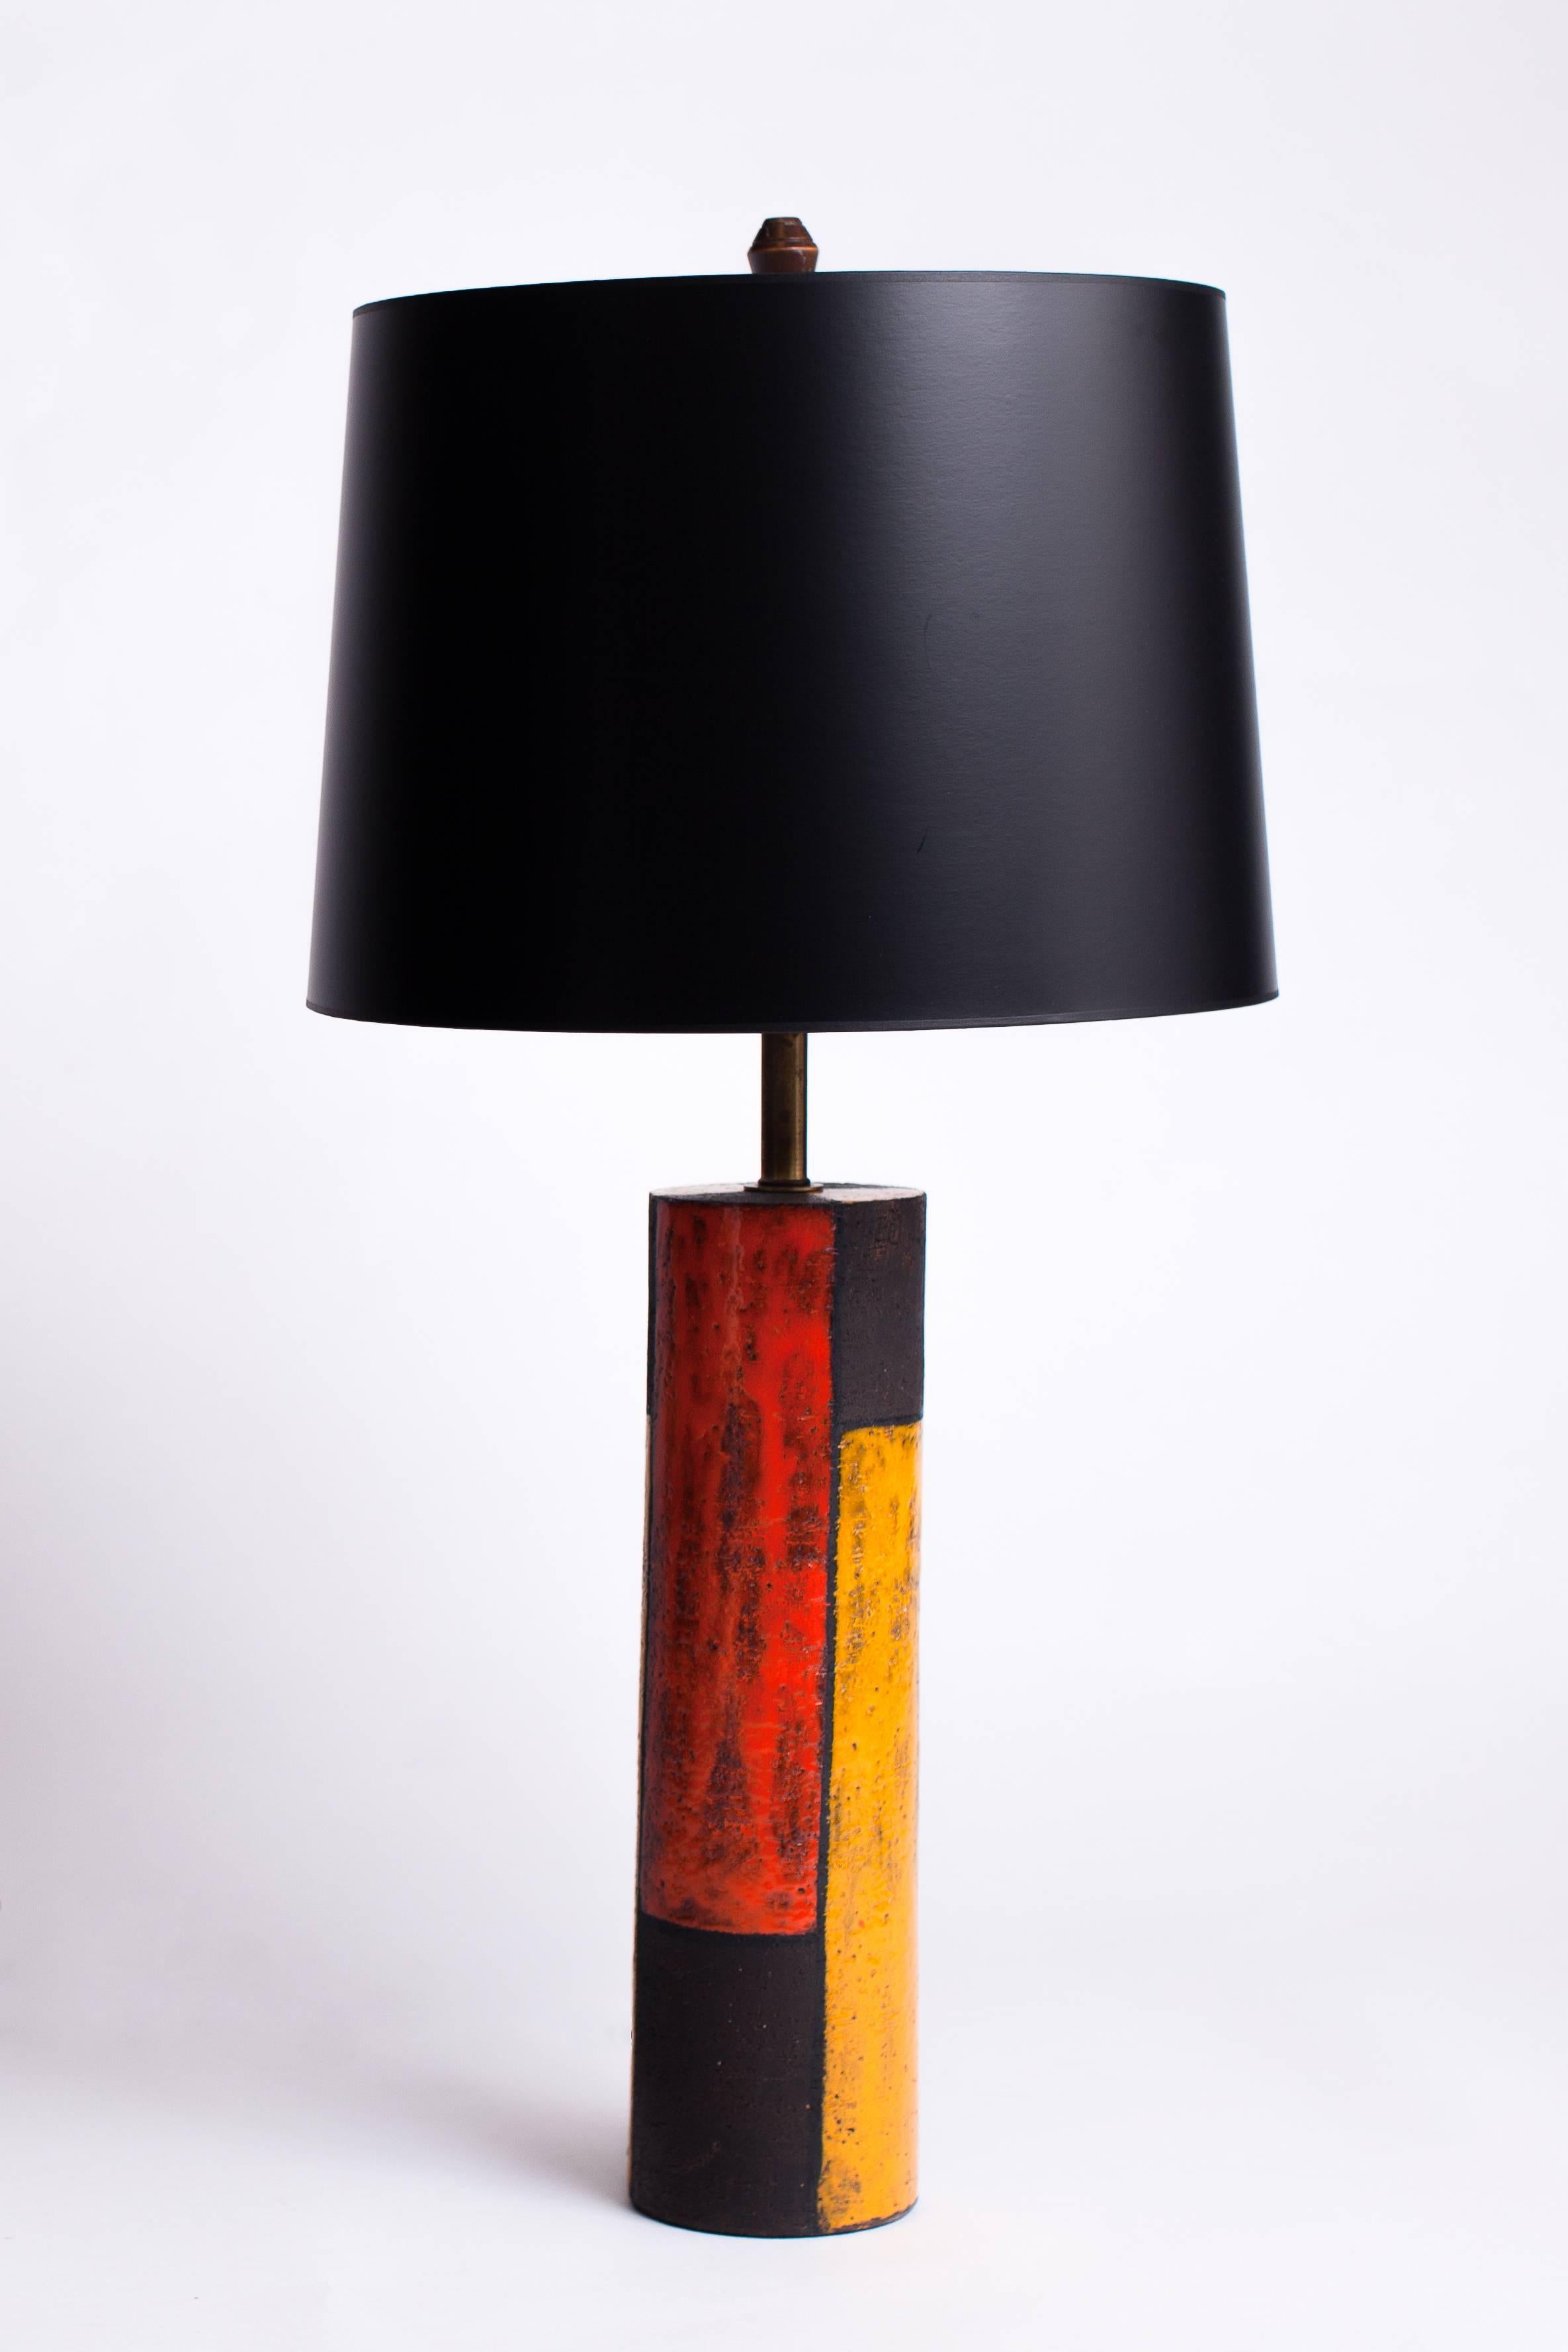 Aldo Londi (1911–2003).

Striking ceramic “Mondrian” table lamp by Aldo Londi for historic Italian ceramics house Bitossi. With brass mounts and a vibrant red and yellow glaze on matte black field in a cubist, geometric design. For fifty years